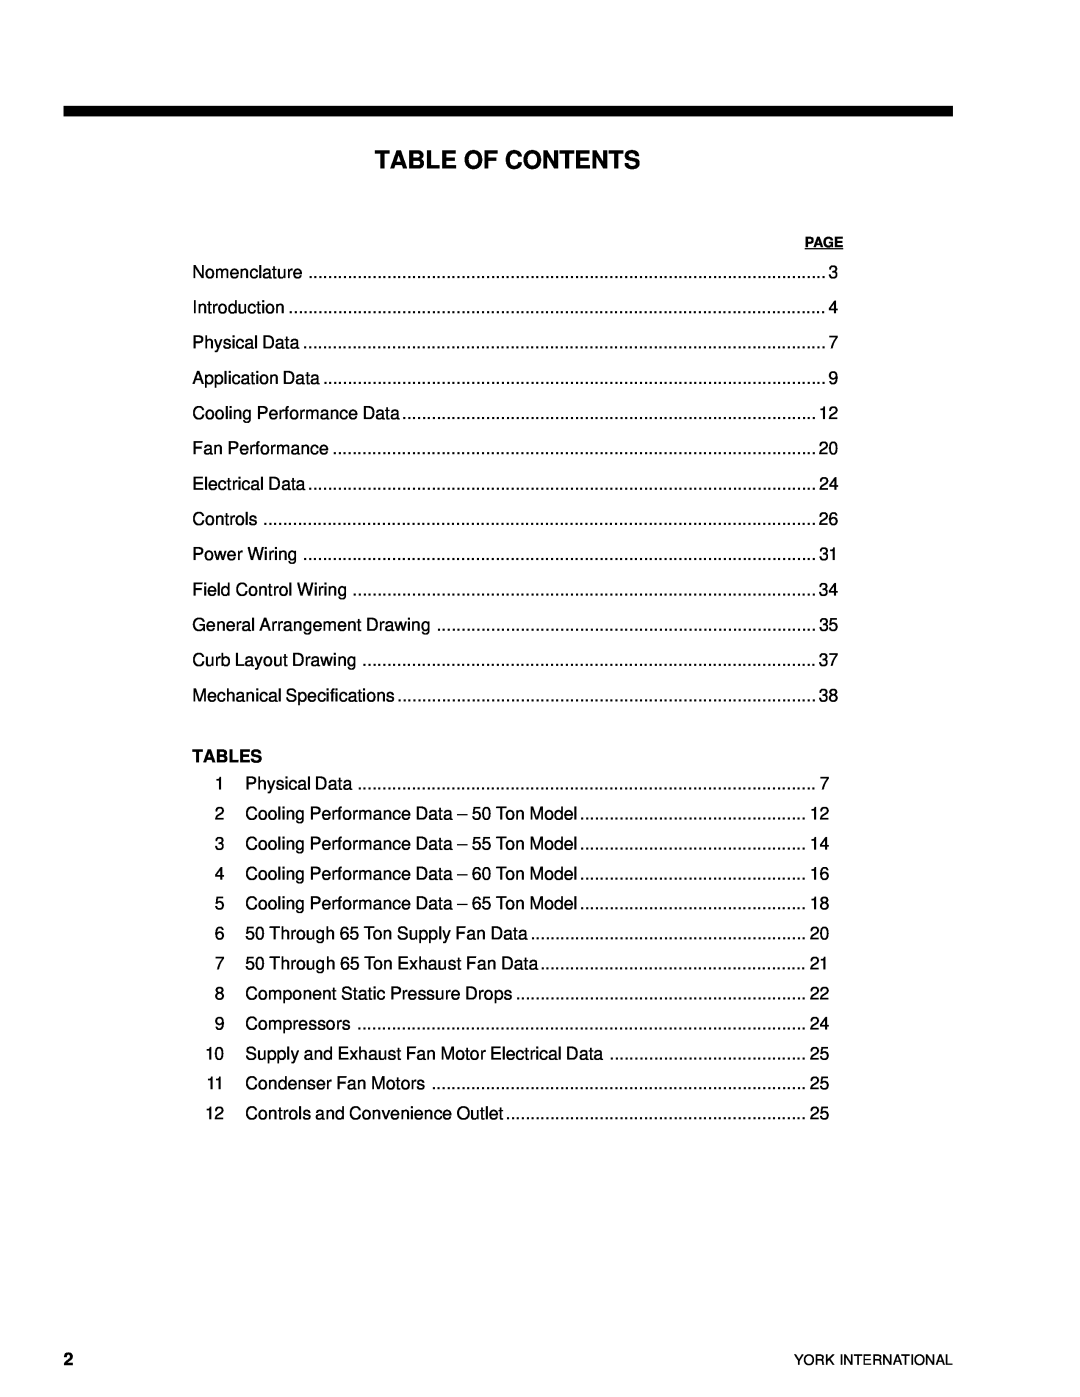 York R-407C manual Table Of Contents, Tables 